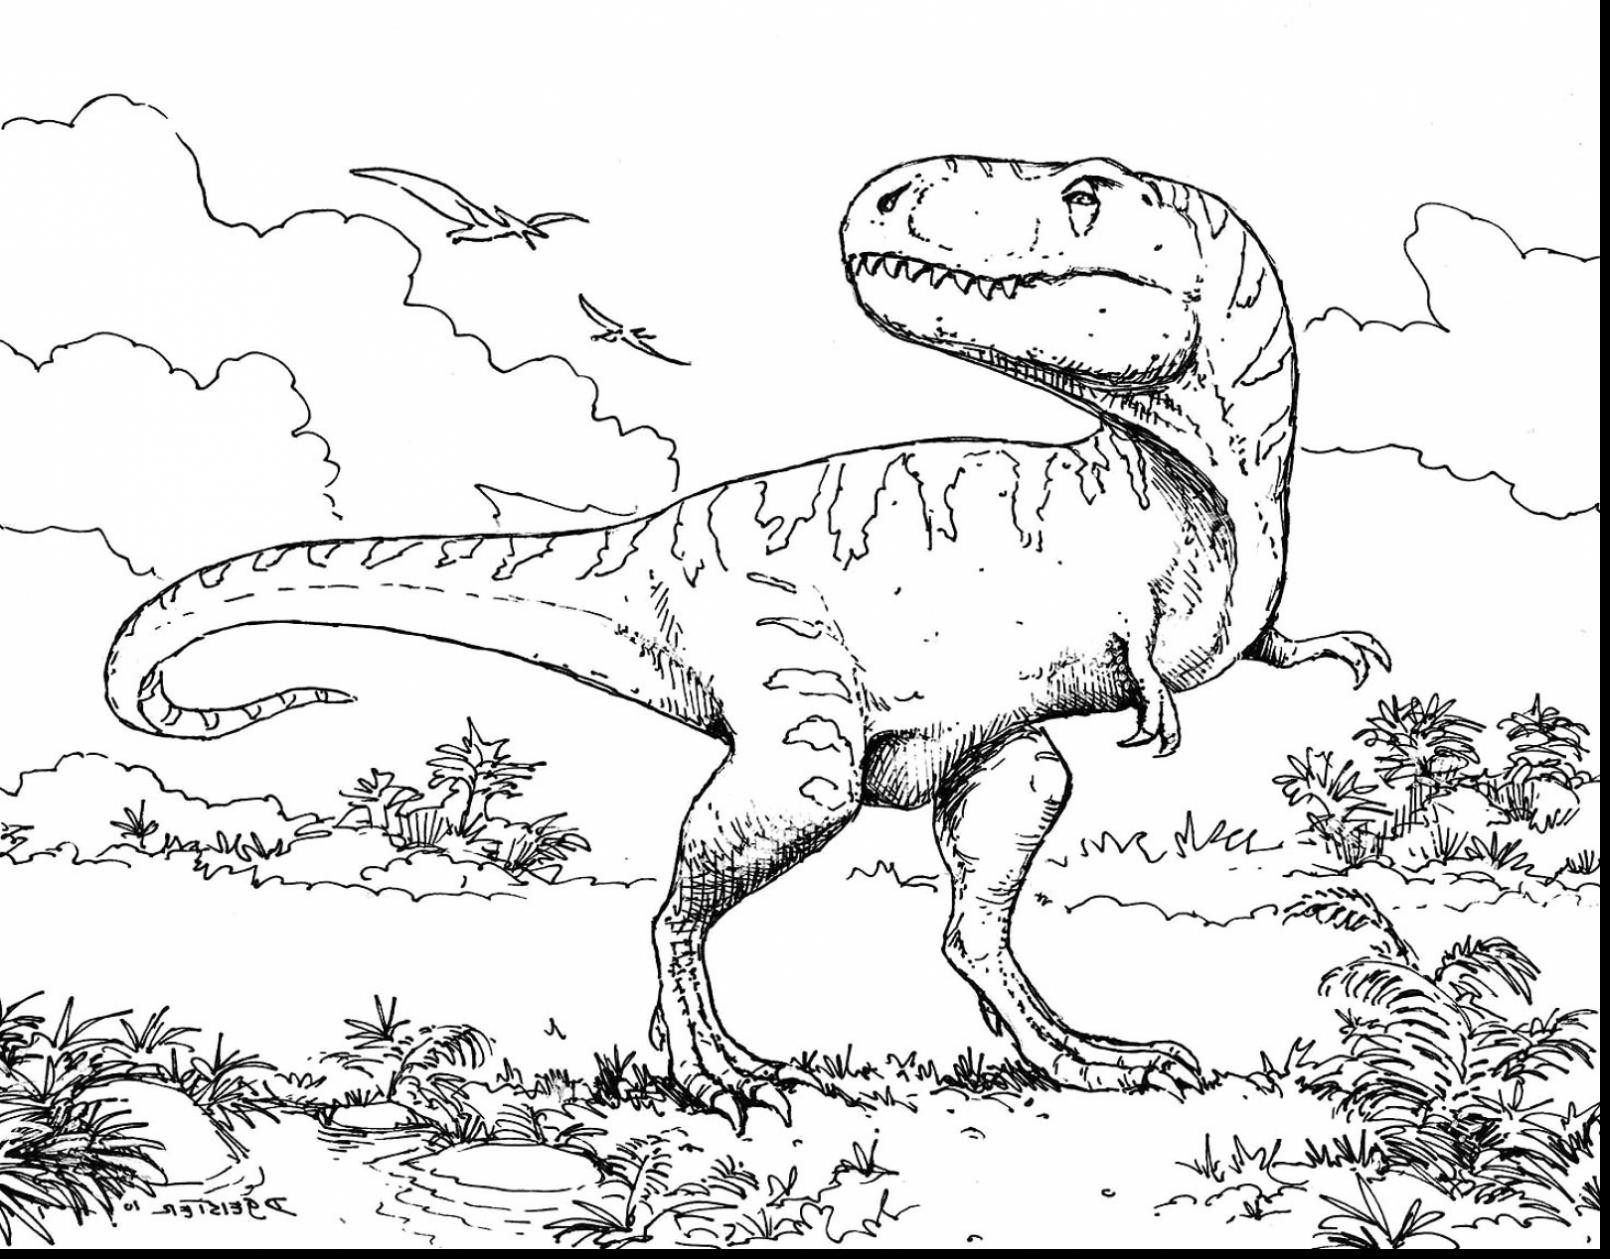 Sensational T Rex Coloring Page Jurassic Park Free Printable Pages Beautiful Tixac